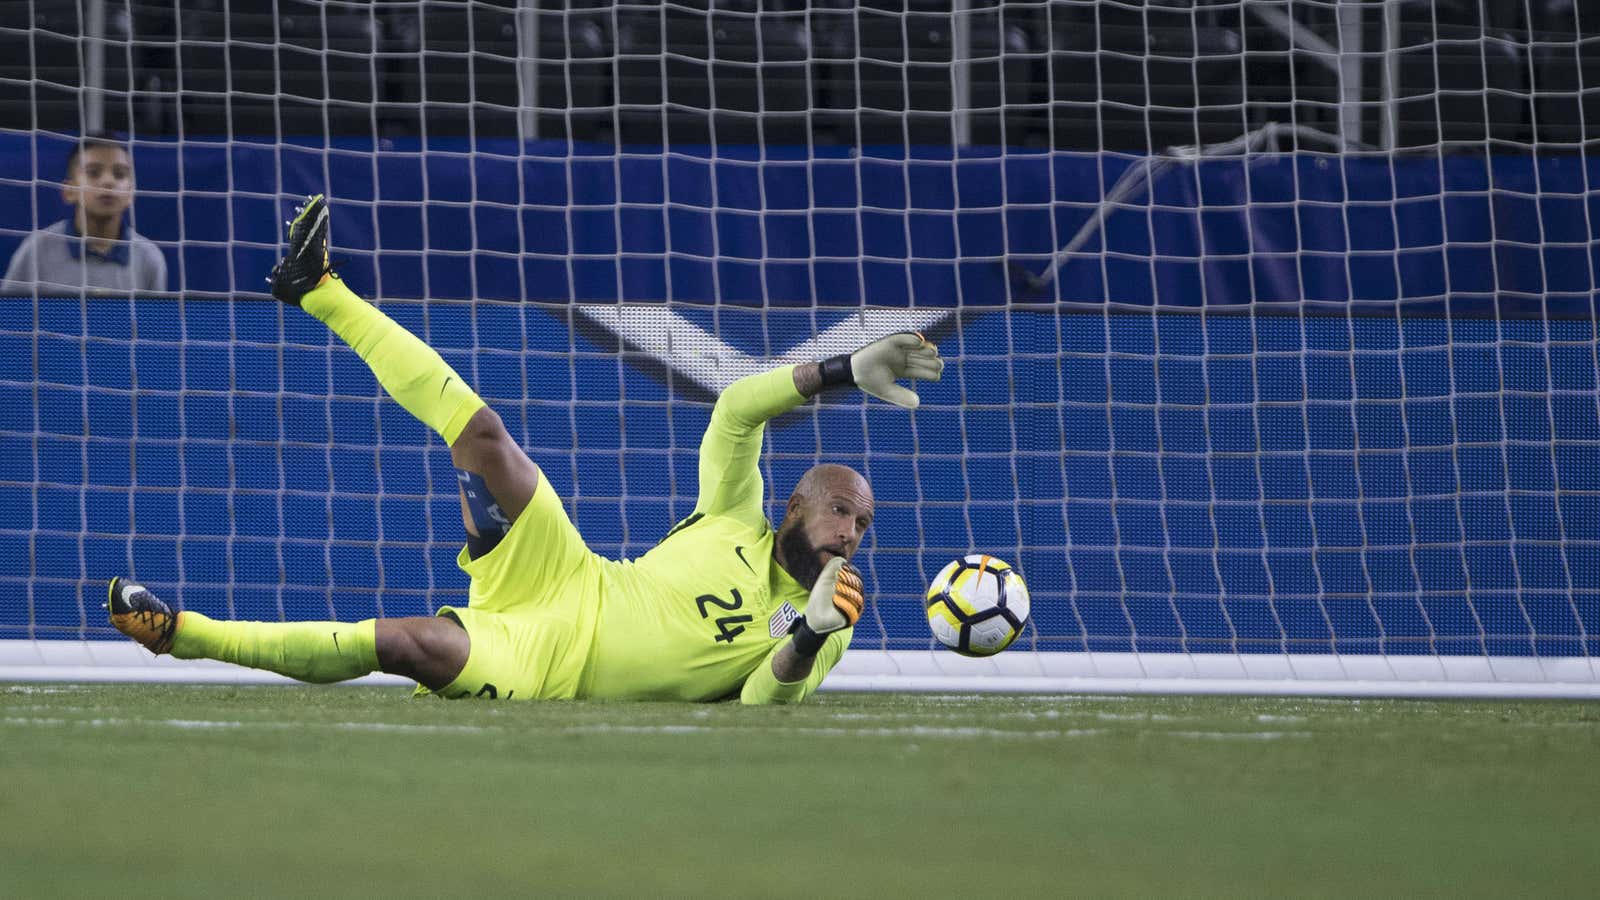 Even Tim Howard couldn’t save it.